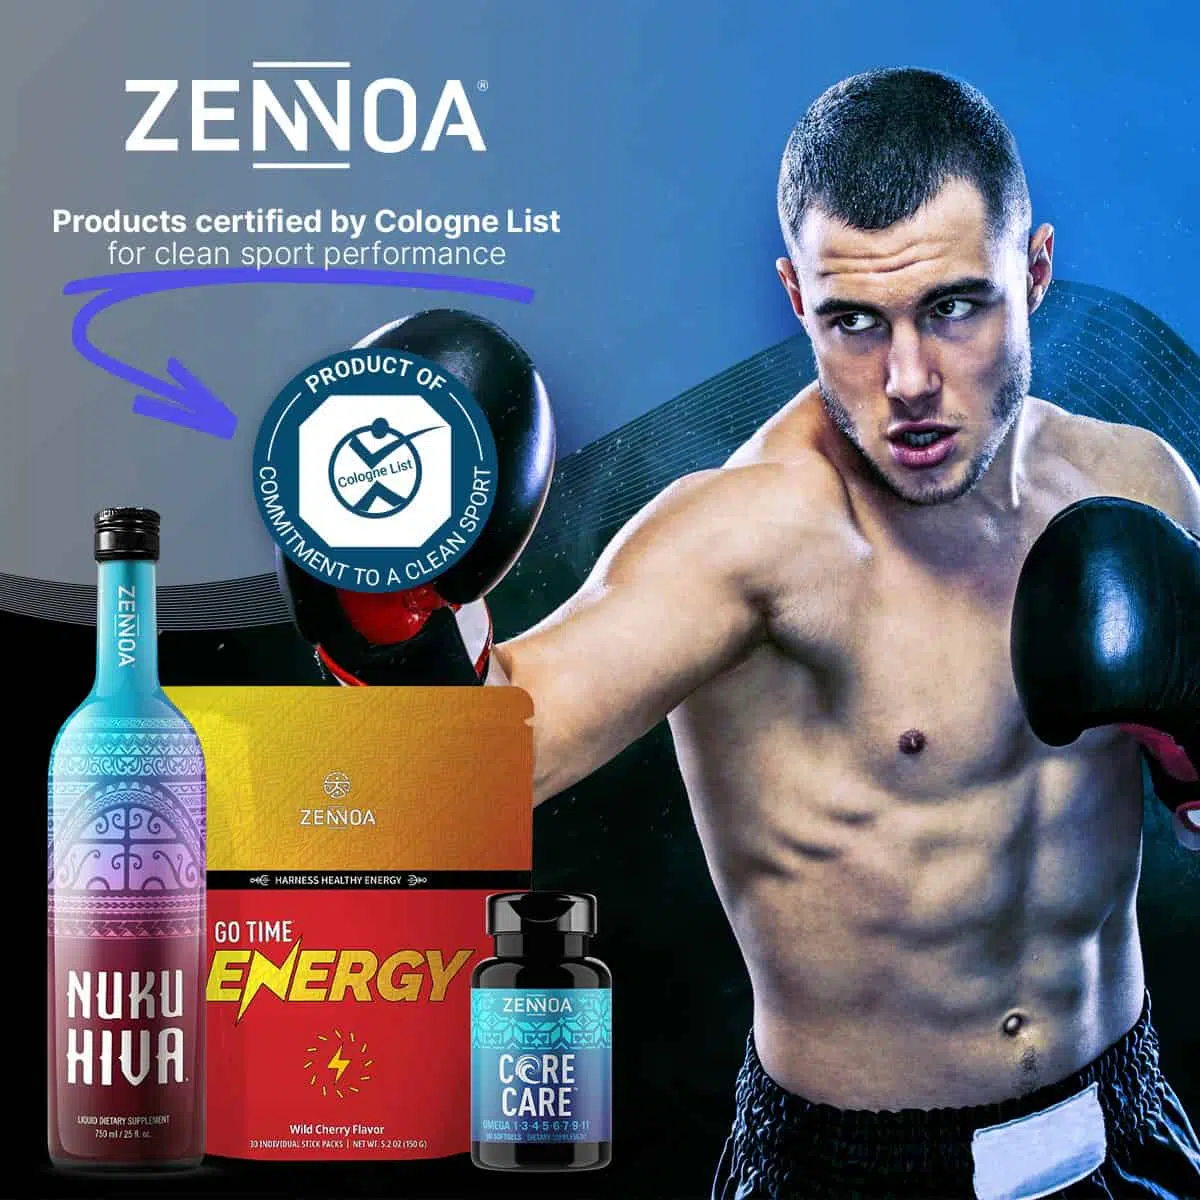 ZENNOA Products Certified by Cologne List